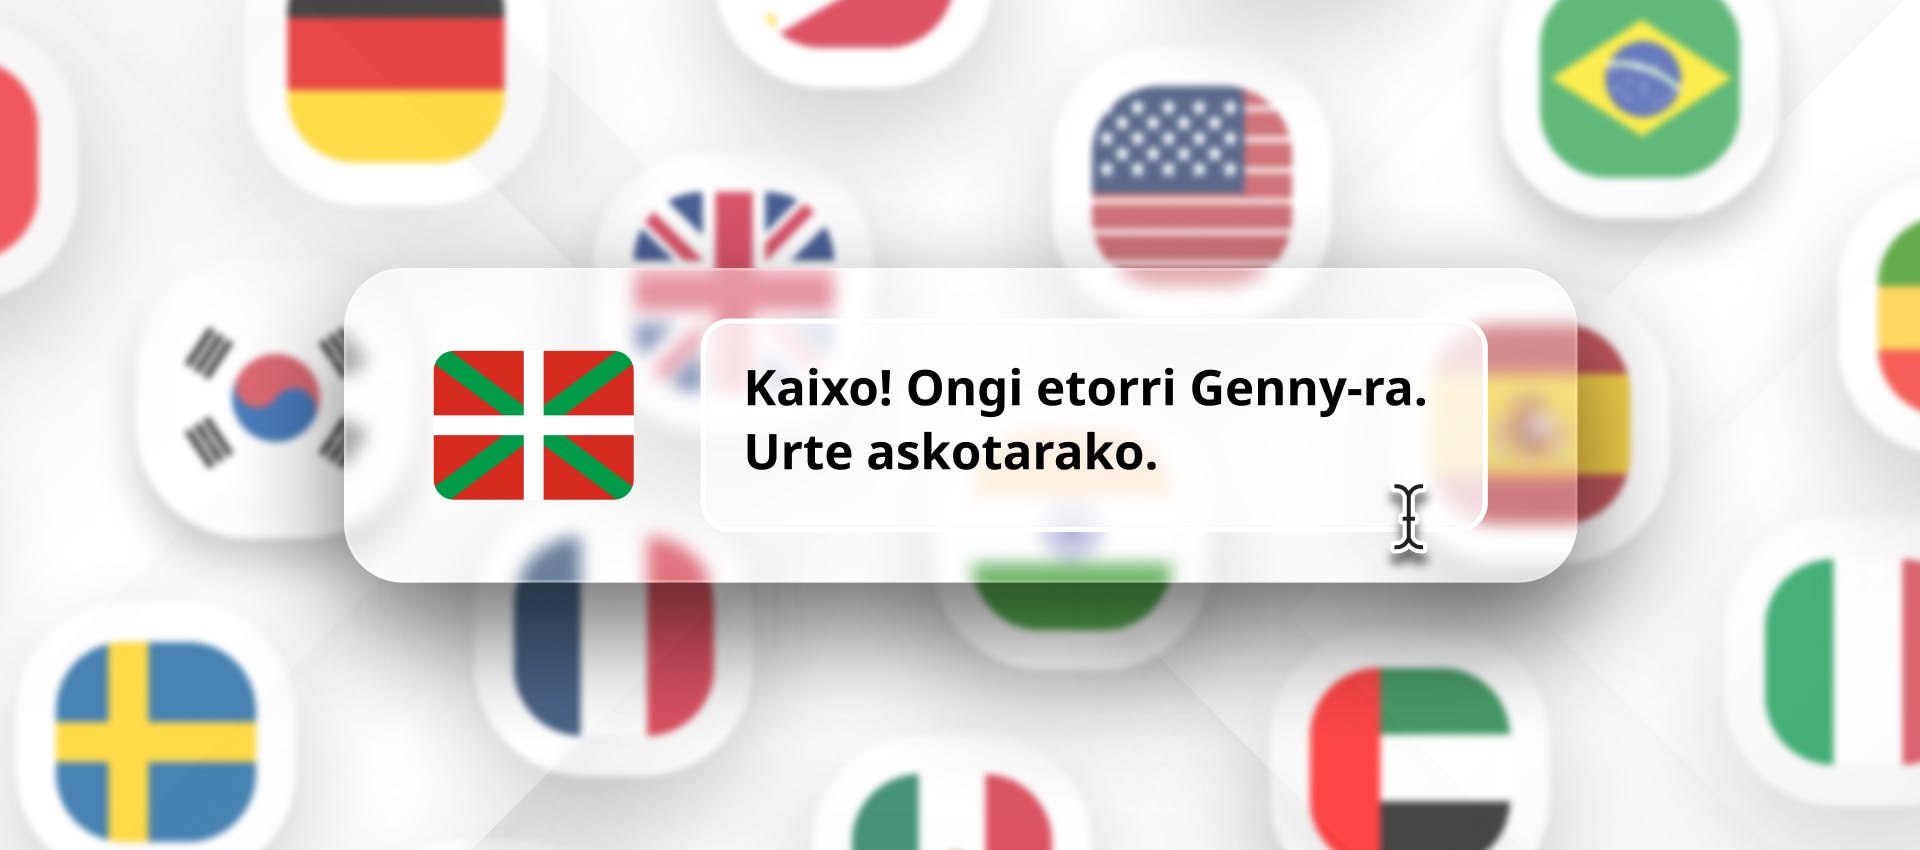 Basque phrase for Basque TTS generation with different flags in the background